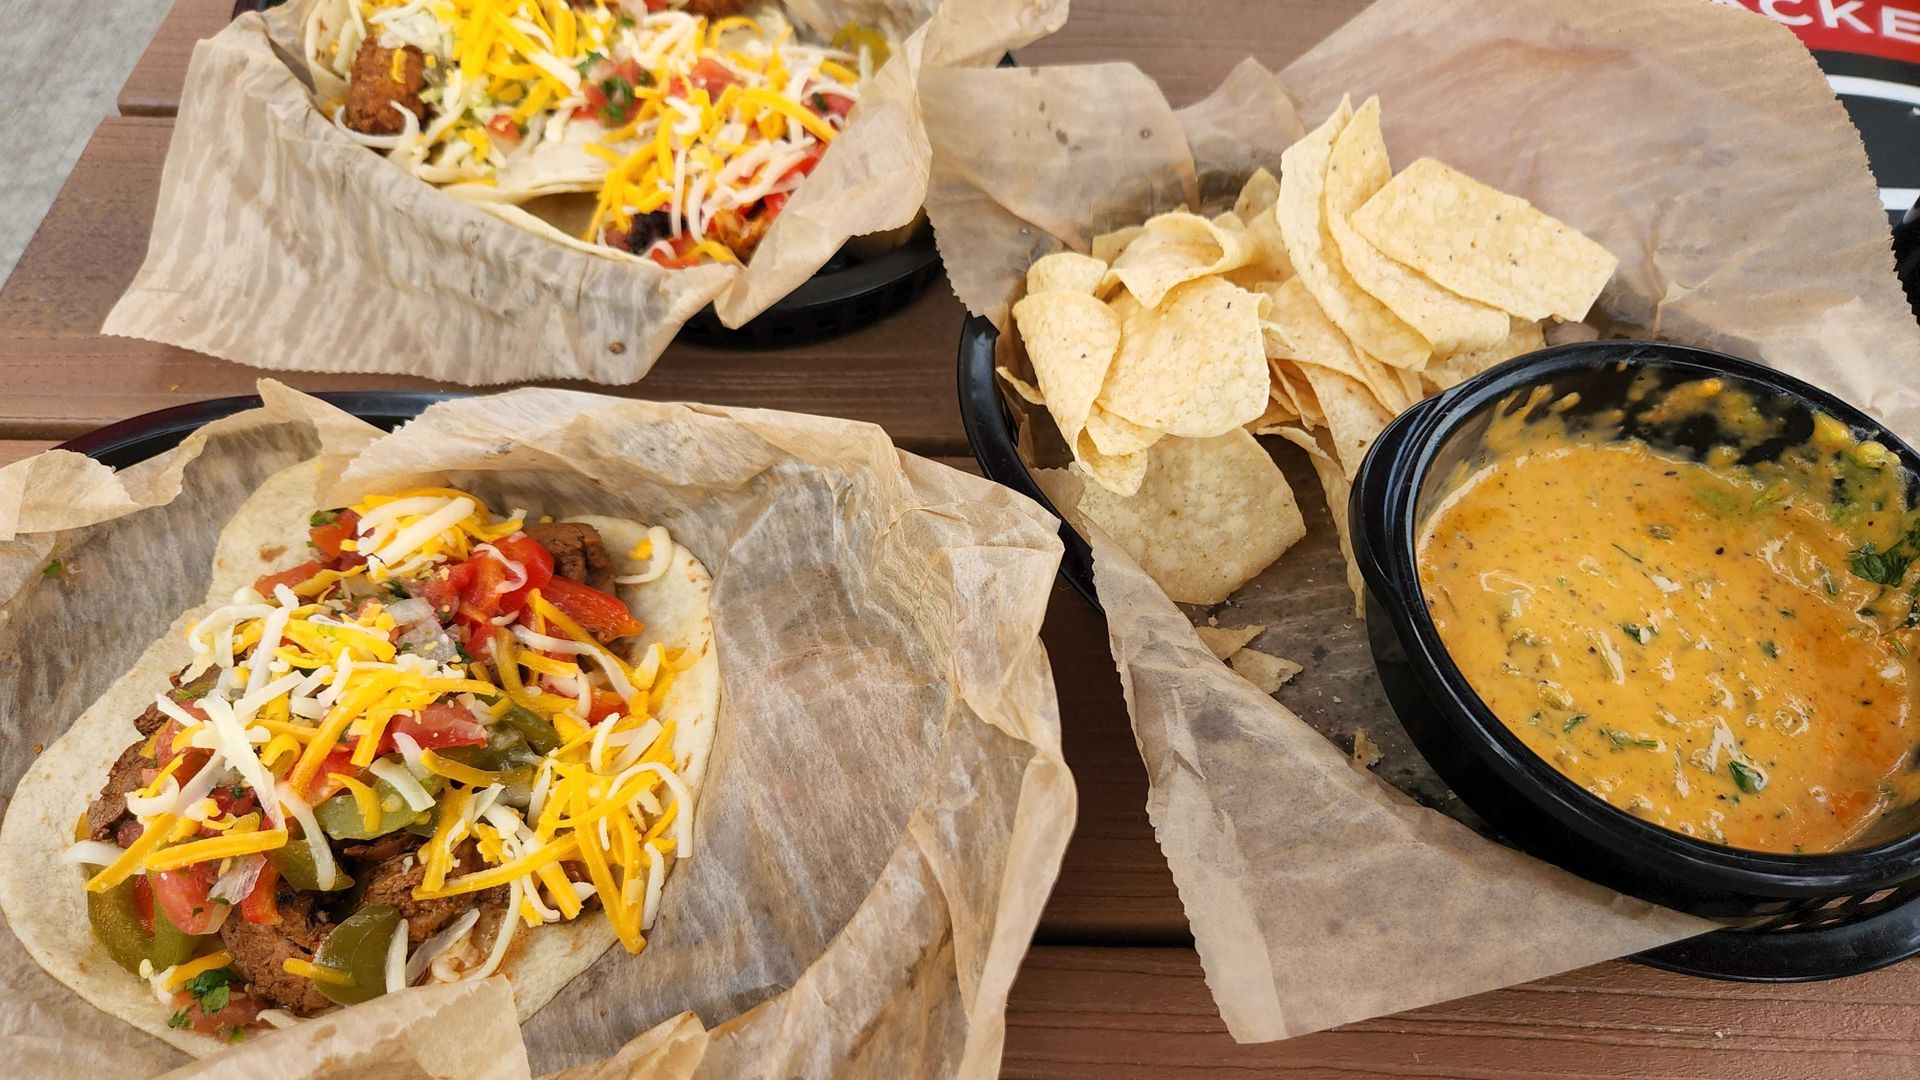 An overview of tacos and queso dip in brown paper-lined baskets